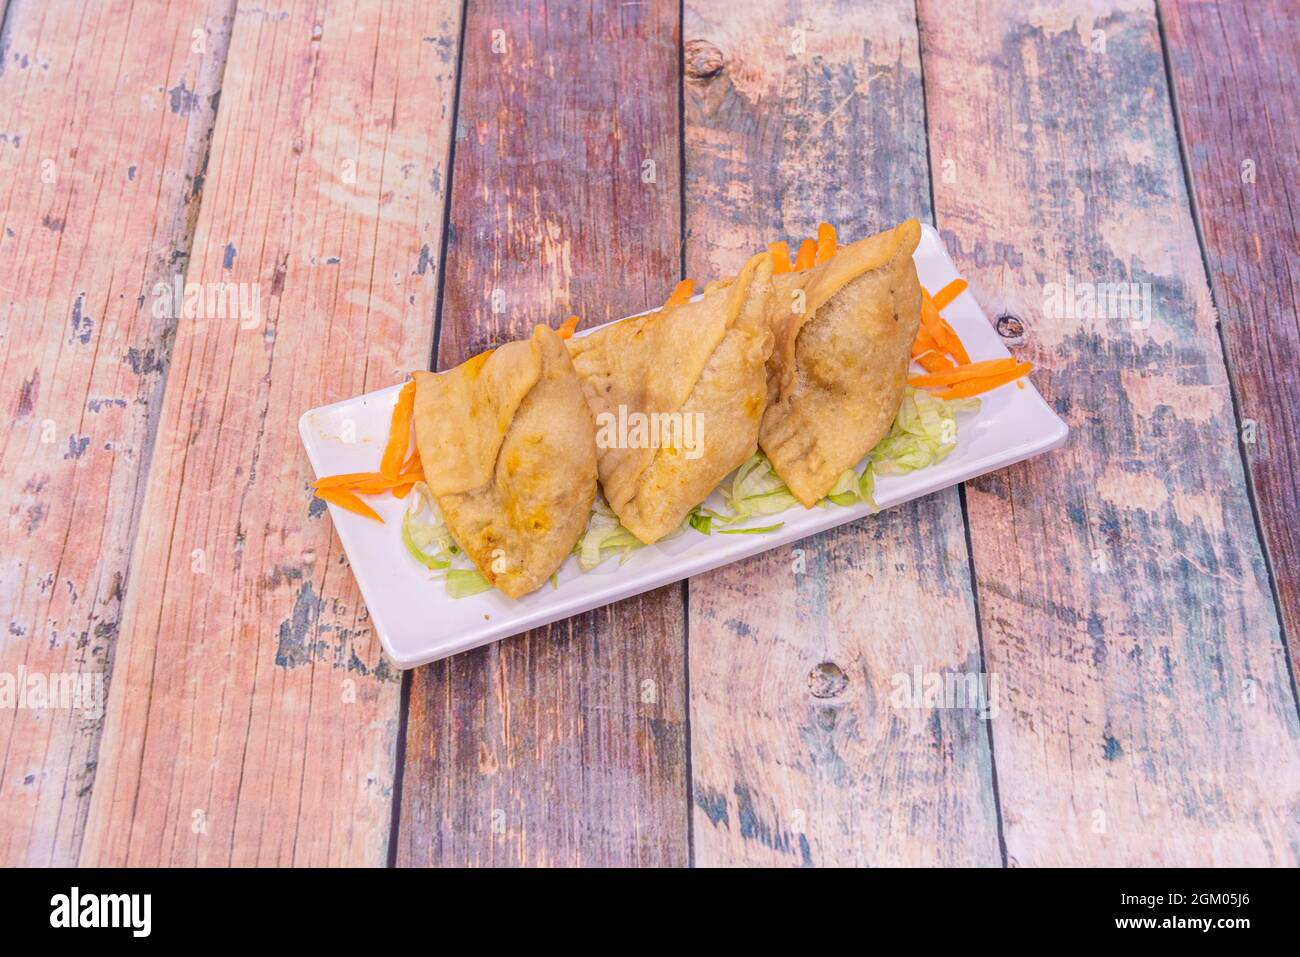 tray of fried samosas stuffed with lamb meat on a bed of iceberg lettuce and grated carrots on a wooden table Stock Photo